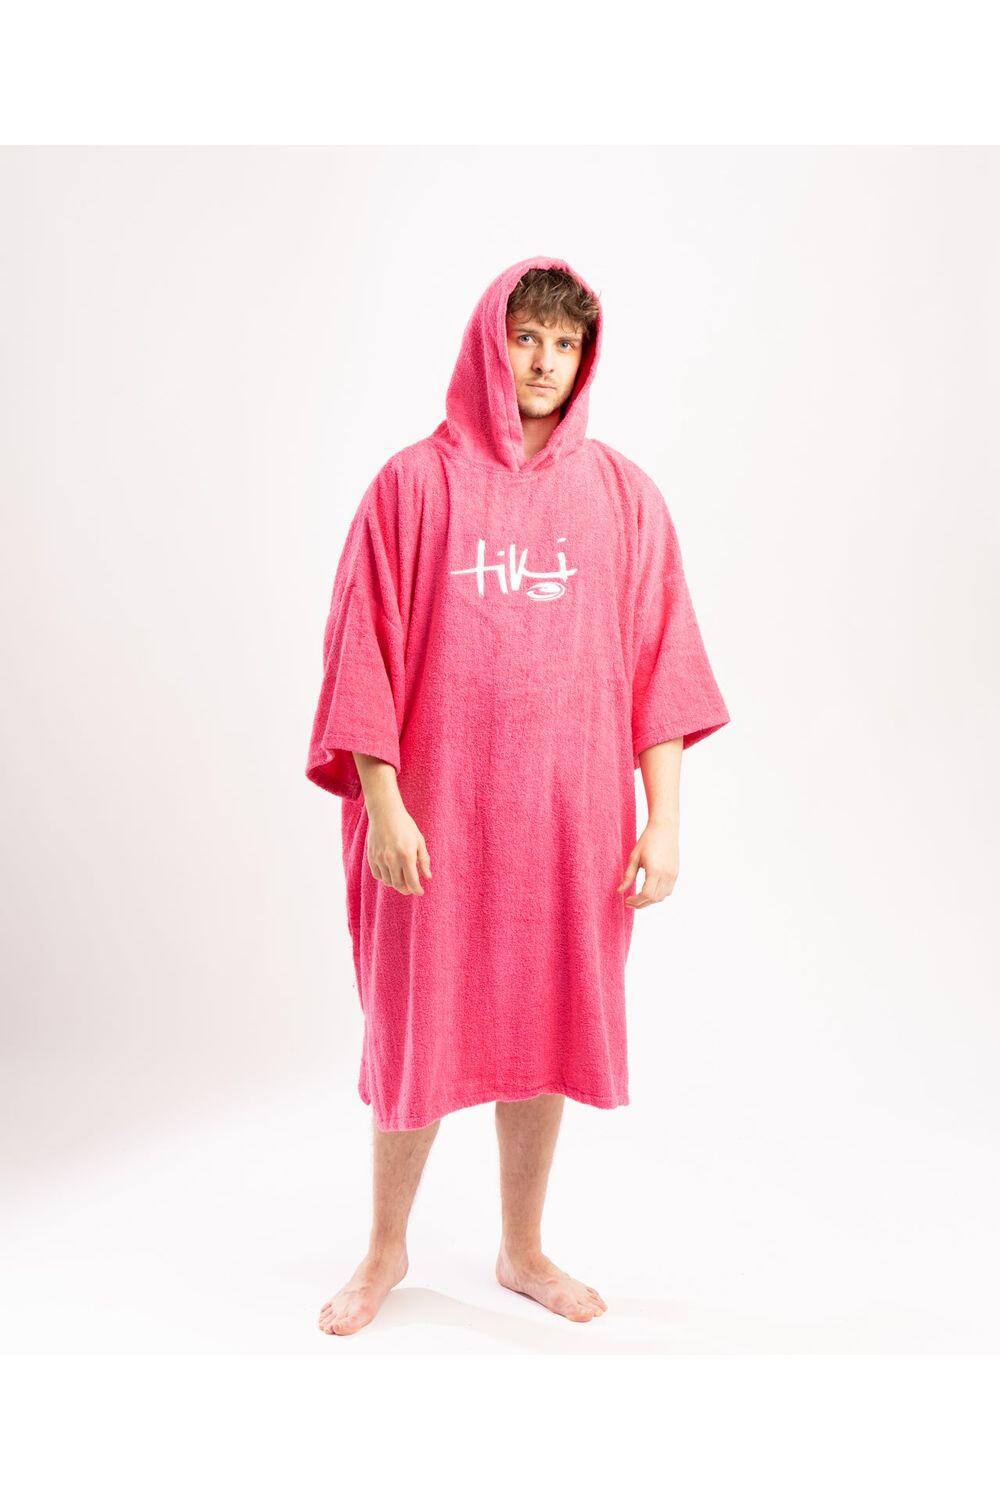 Adults Hooded Change Robe - Pink 4/7